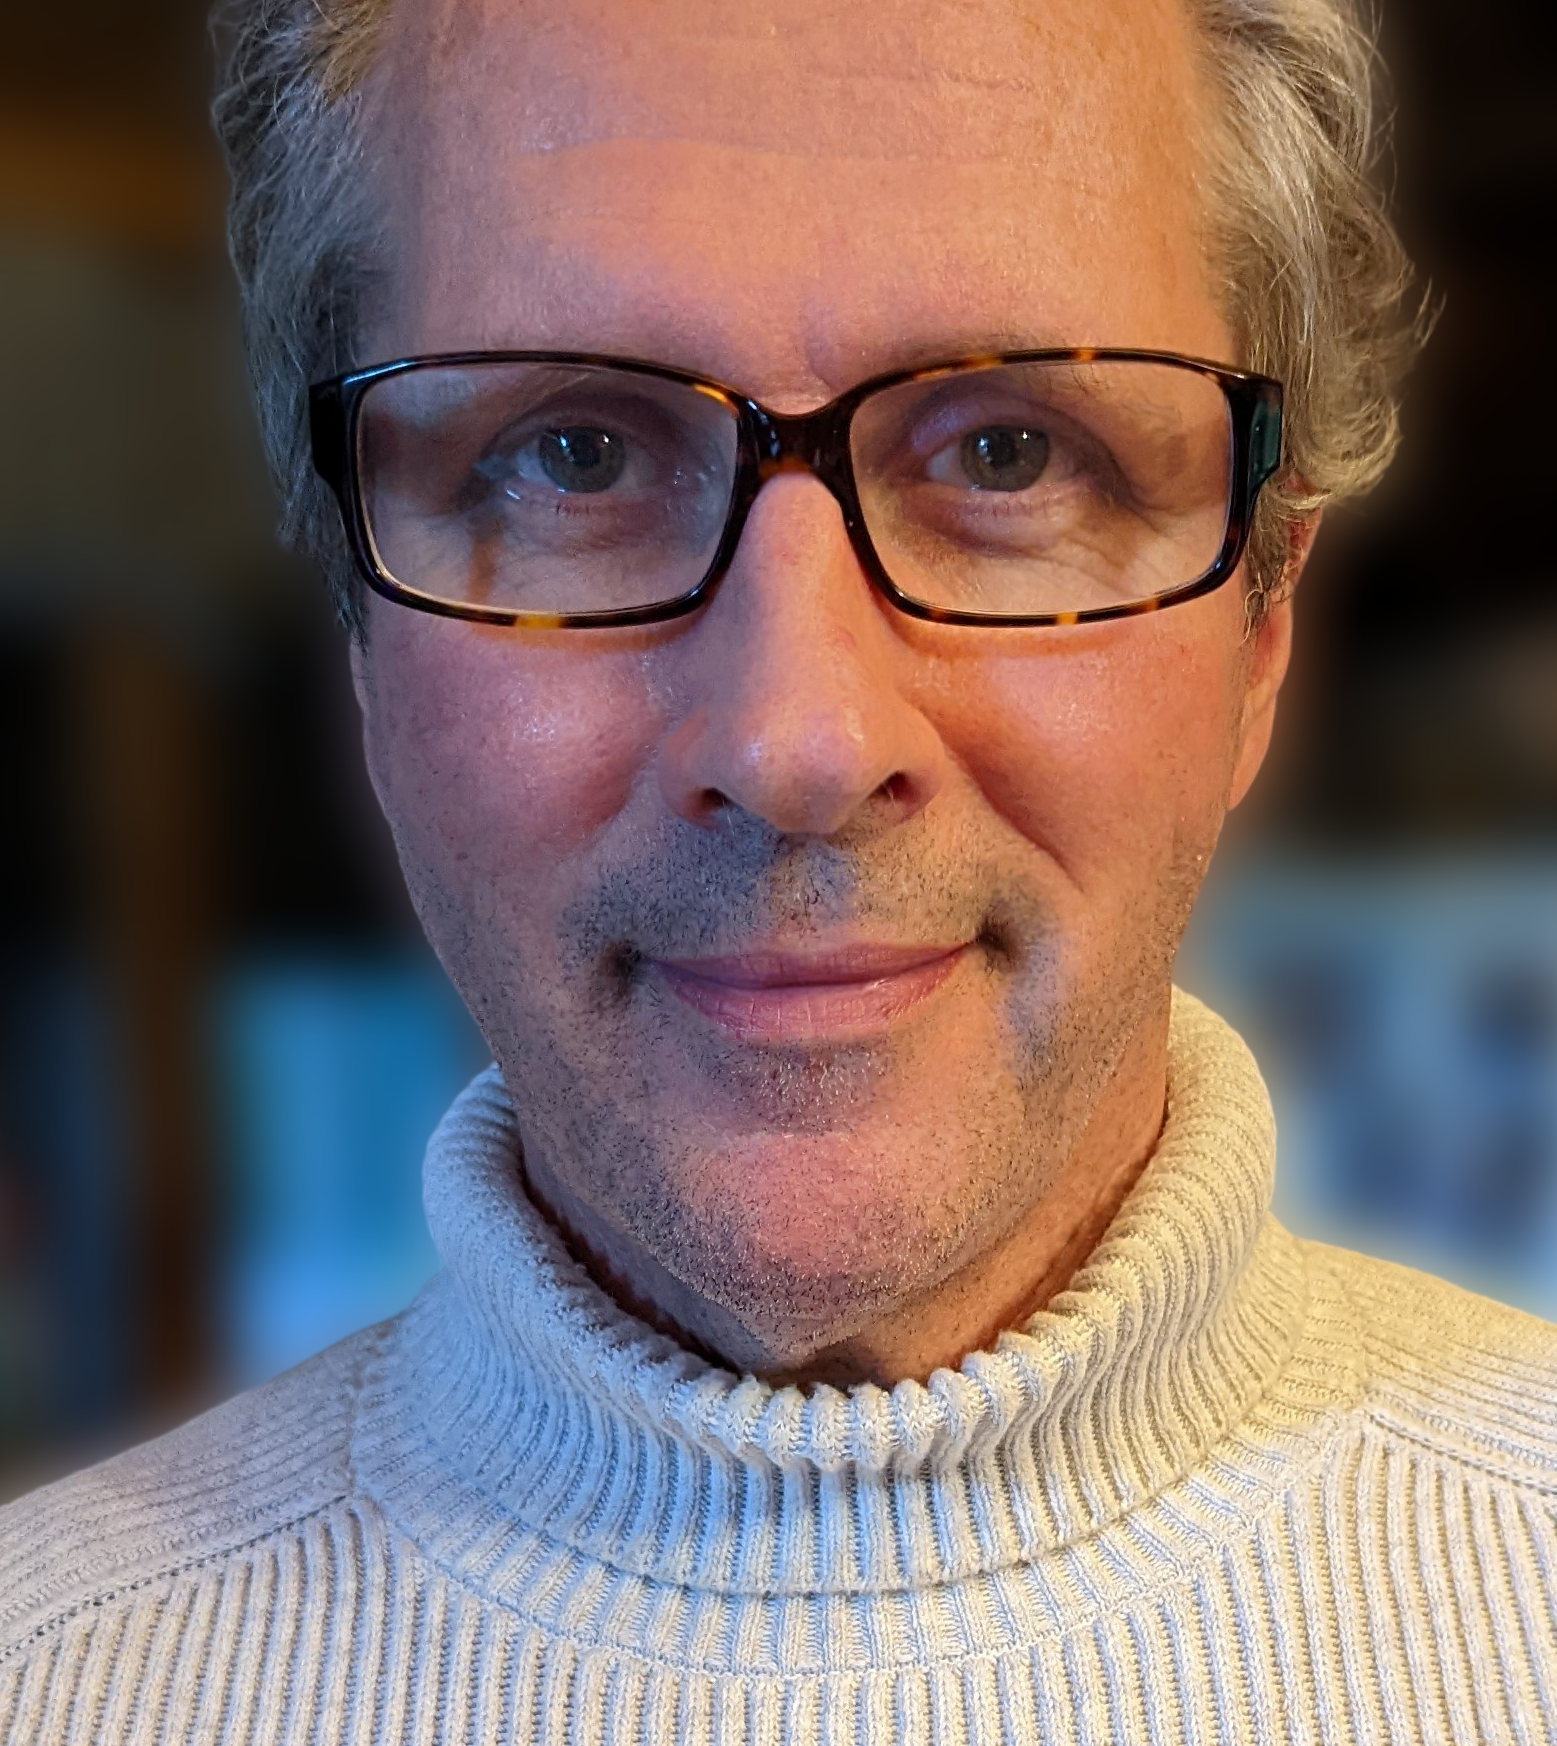 Image ID: Headshot of a middle aged male of white descent wearing a white jumper